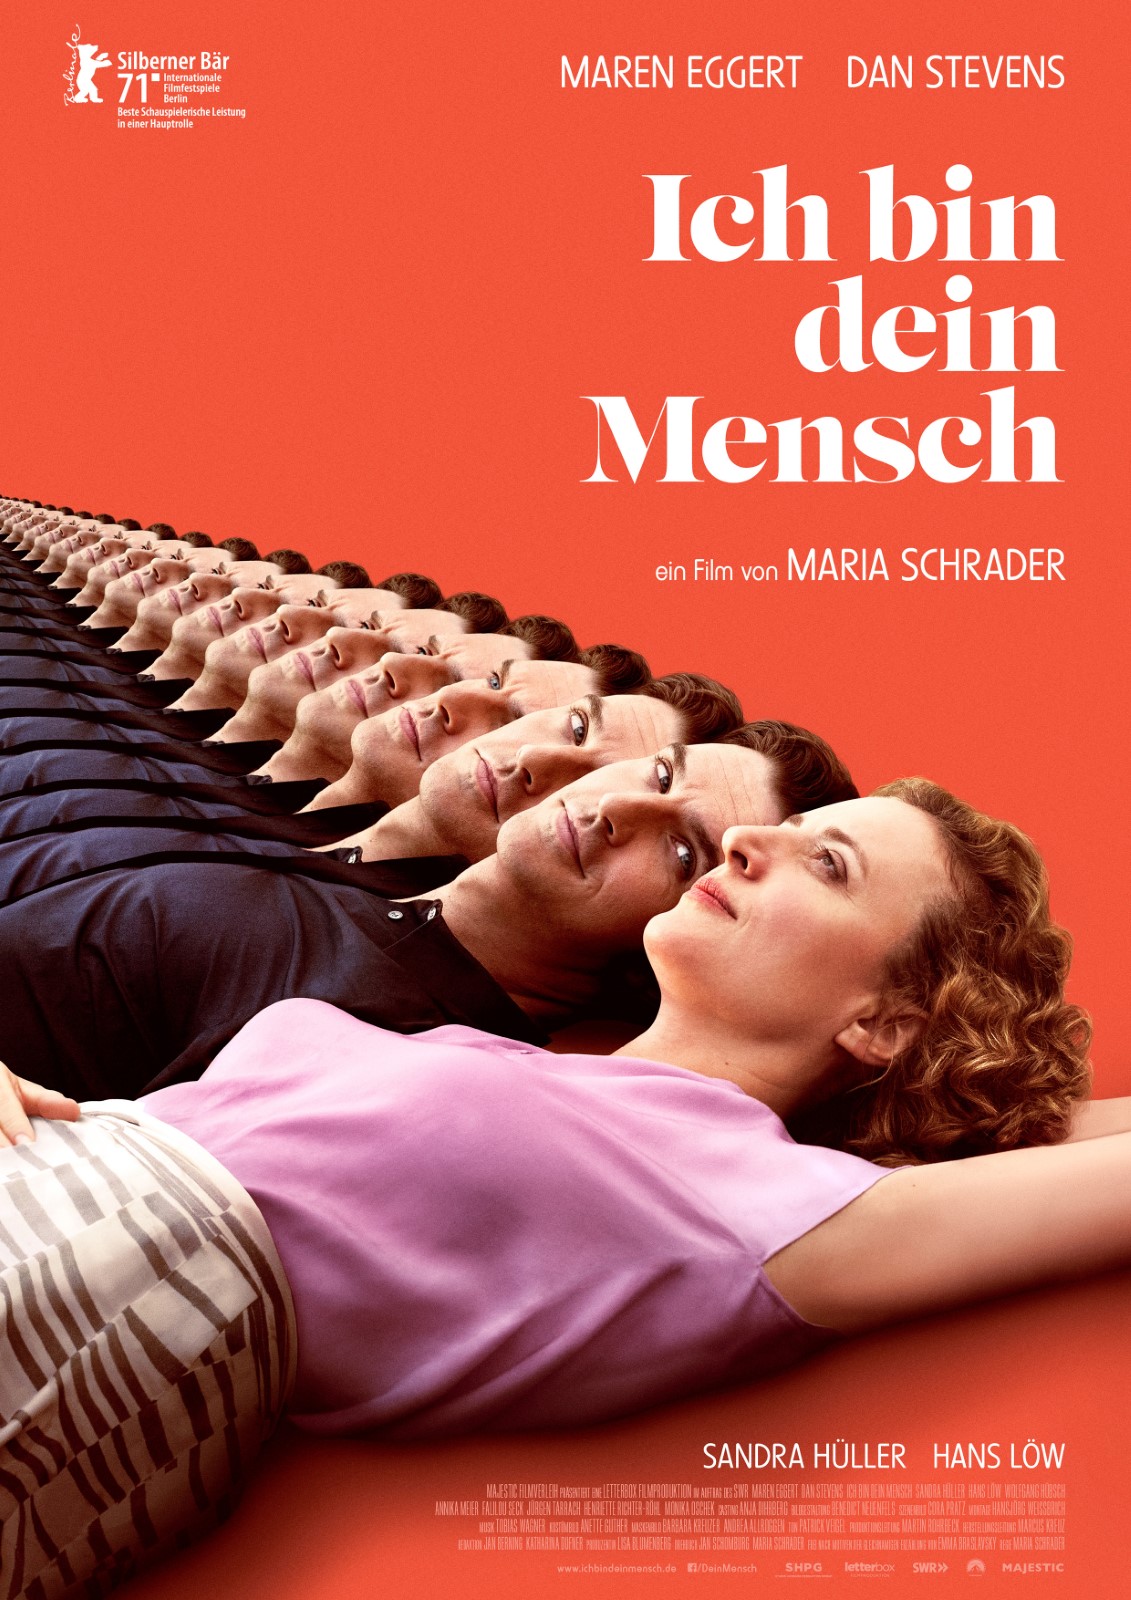 Image of the Movie Poster featuring a Man and woman laying side by side.